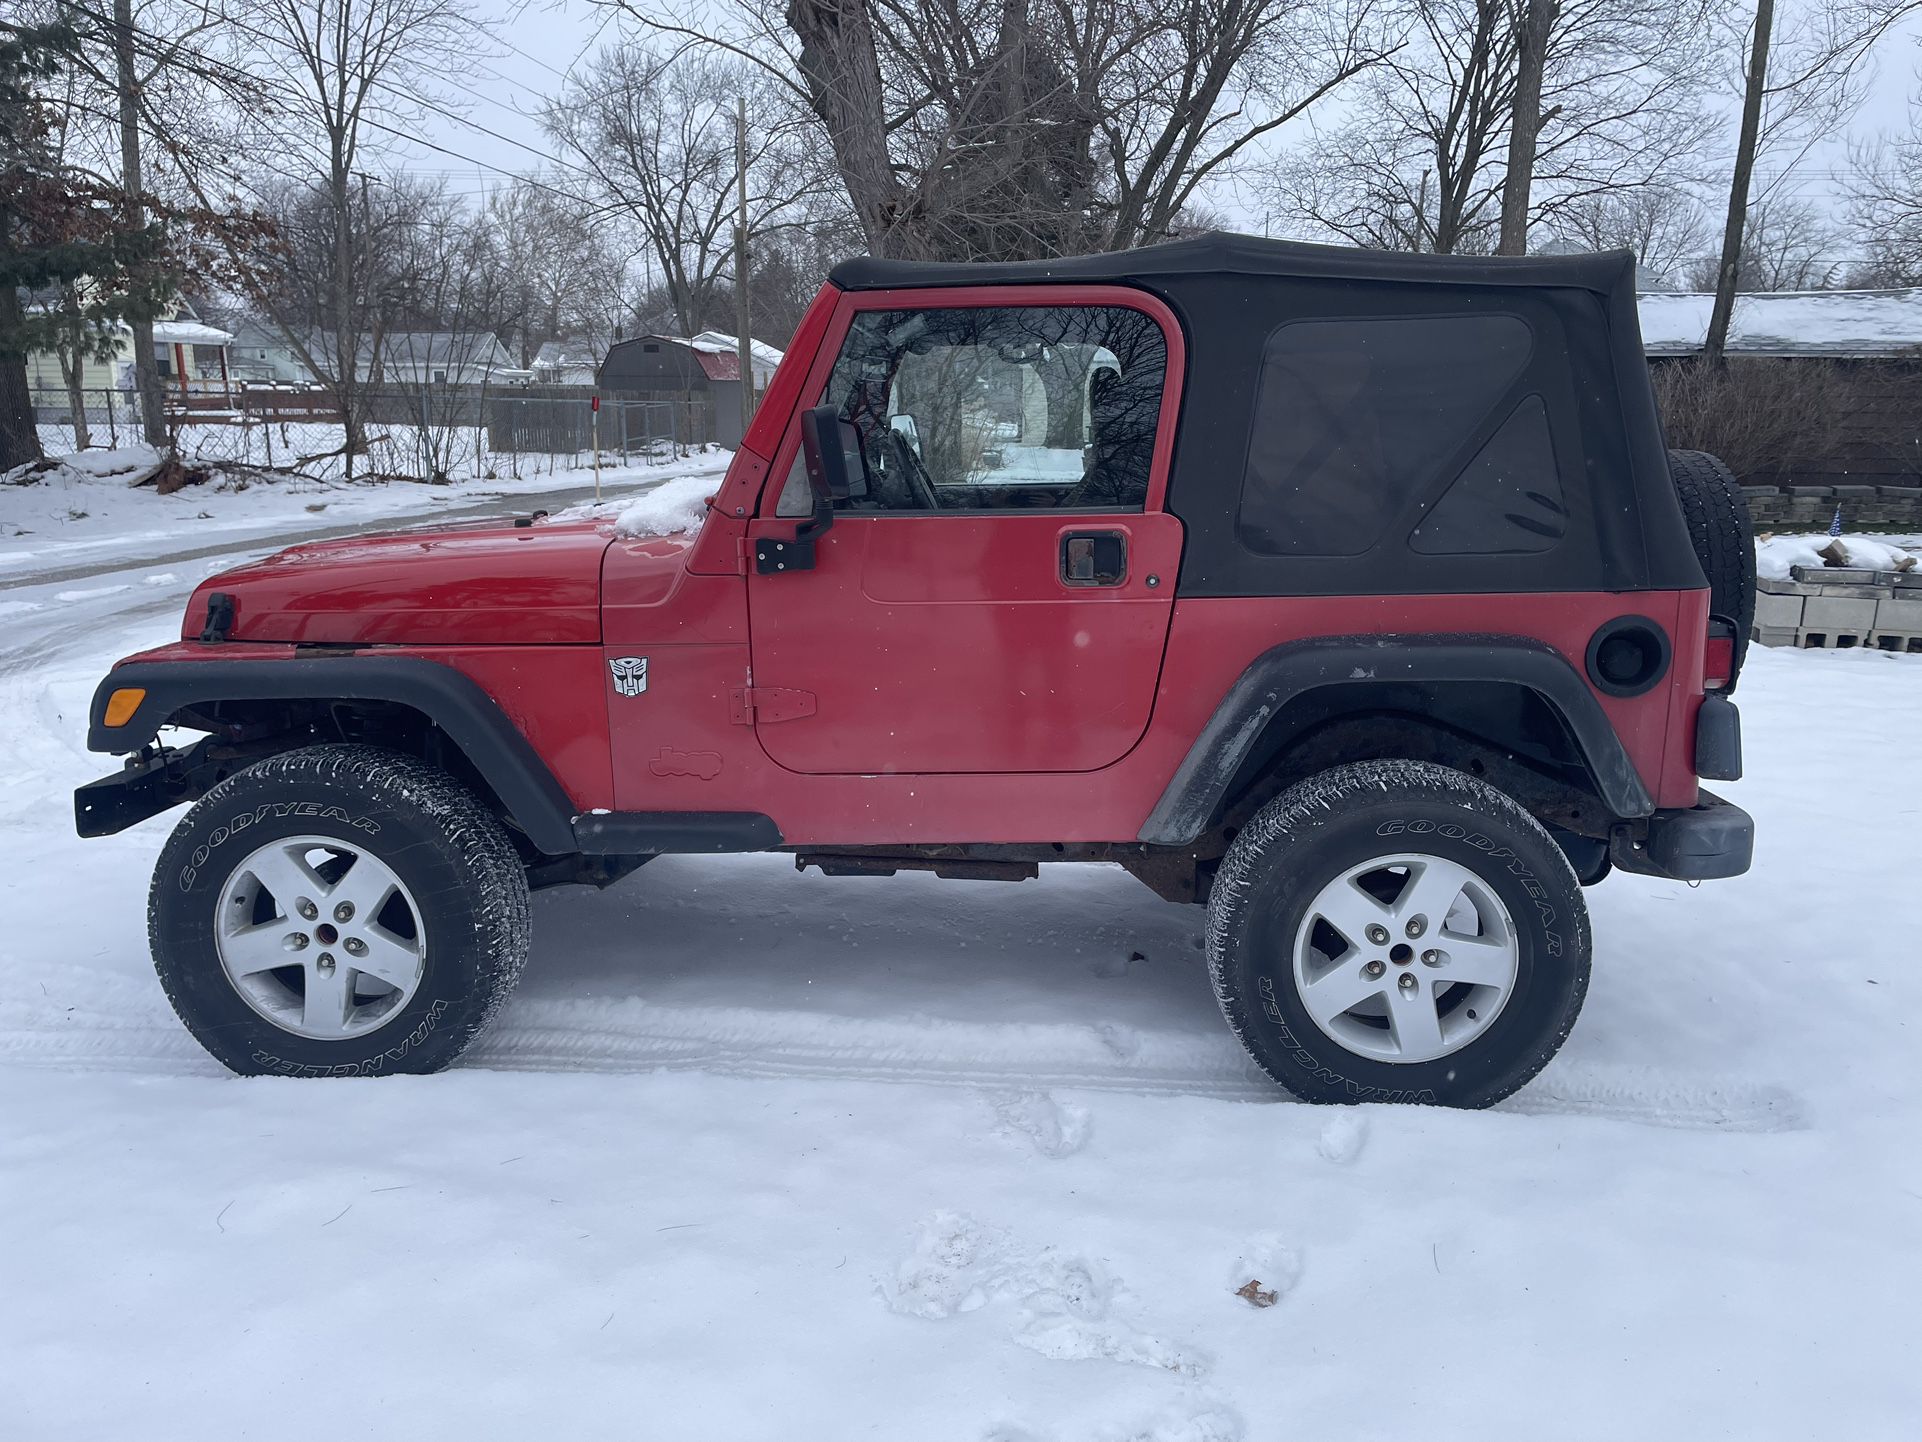 2000 Jeep Wrangler for Sale in Elkhart, IN - OfferUp